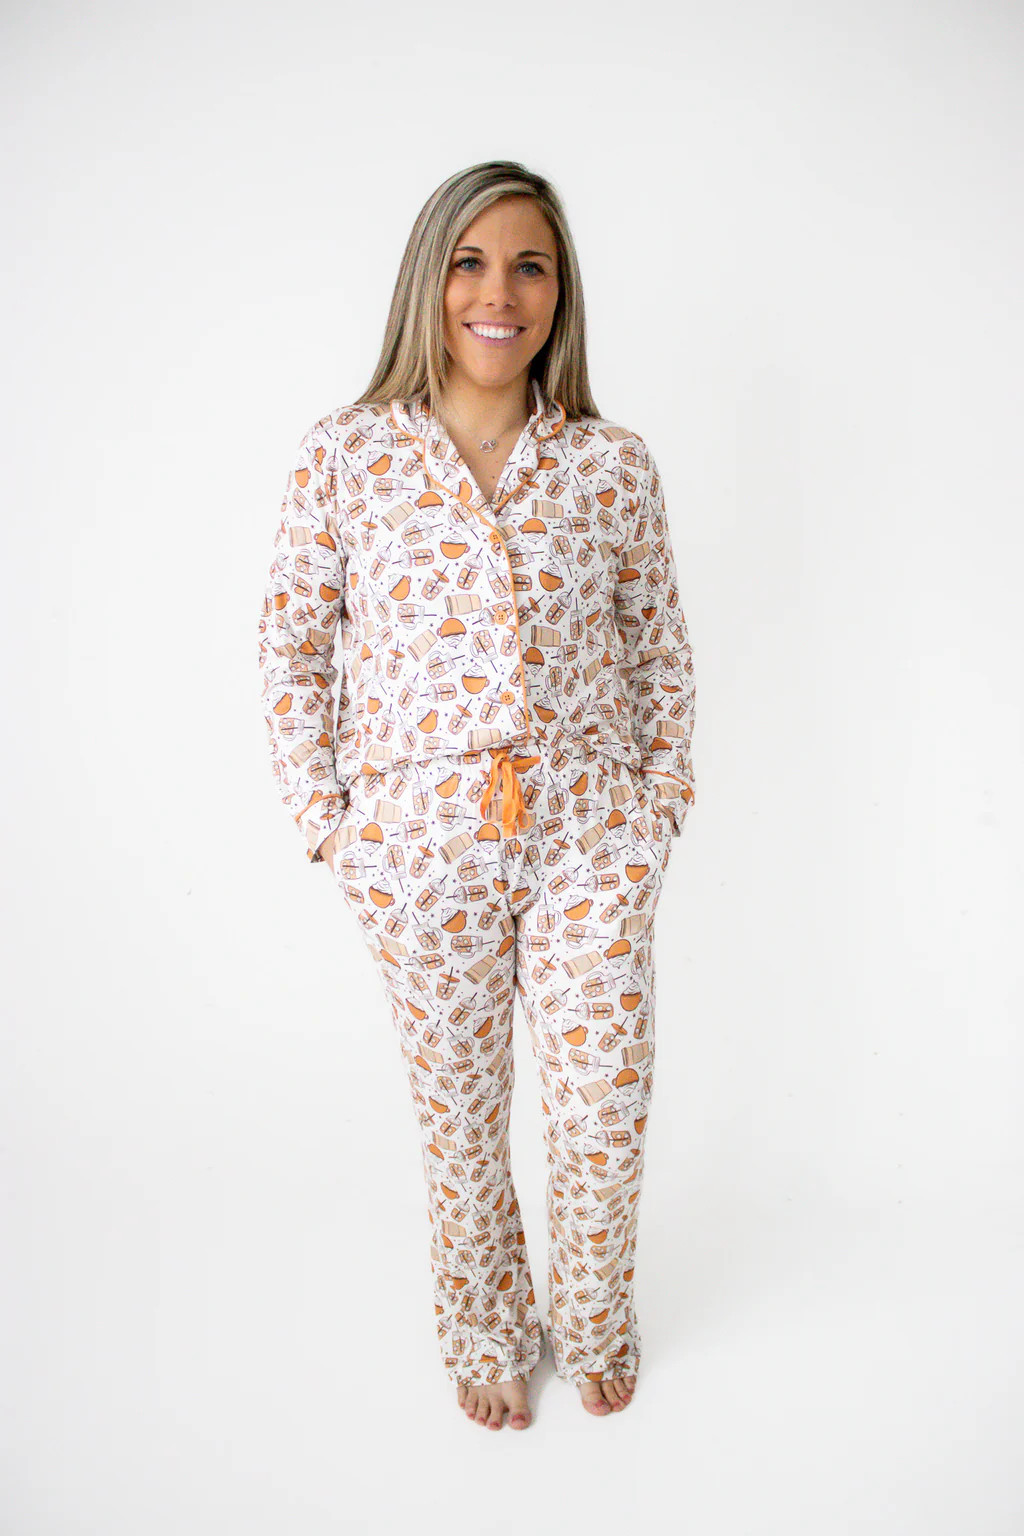 RISE AND GRIND WOMEN’S RELAXED FLARE DREAM SET | DREAM BIG LITTLE CO